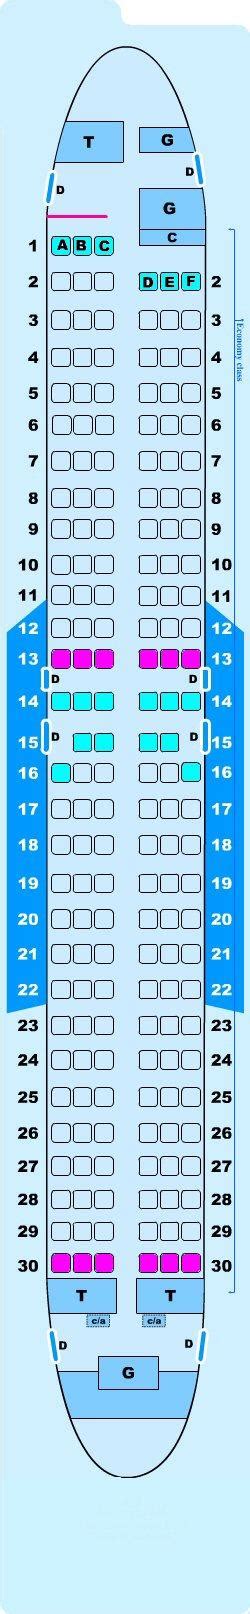 Detailed seat map Lion Air Boeing B737 800. Find the best airplanes seats, information on legroom, recline and in-flight entertainment using our detailed online seating charts. Search. Subscribe. En; Es; Fr; ... Lion Air seating maps. Airbus A330 300; Boeing B737 800; Boeing B737 900ER; Boeing B737 MAX 9; Recent Travel Tips. Hotel Panviman …. 